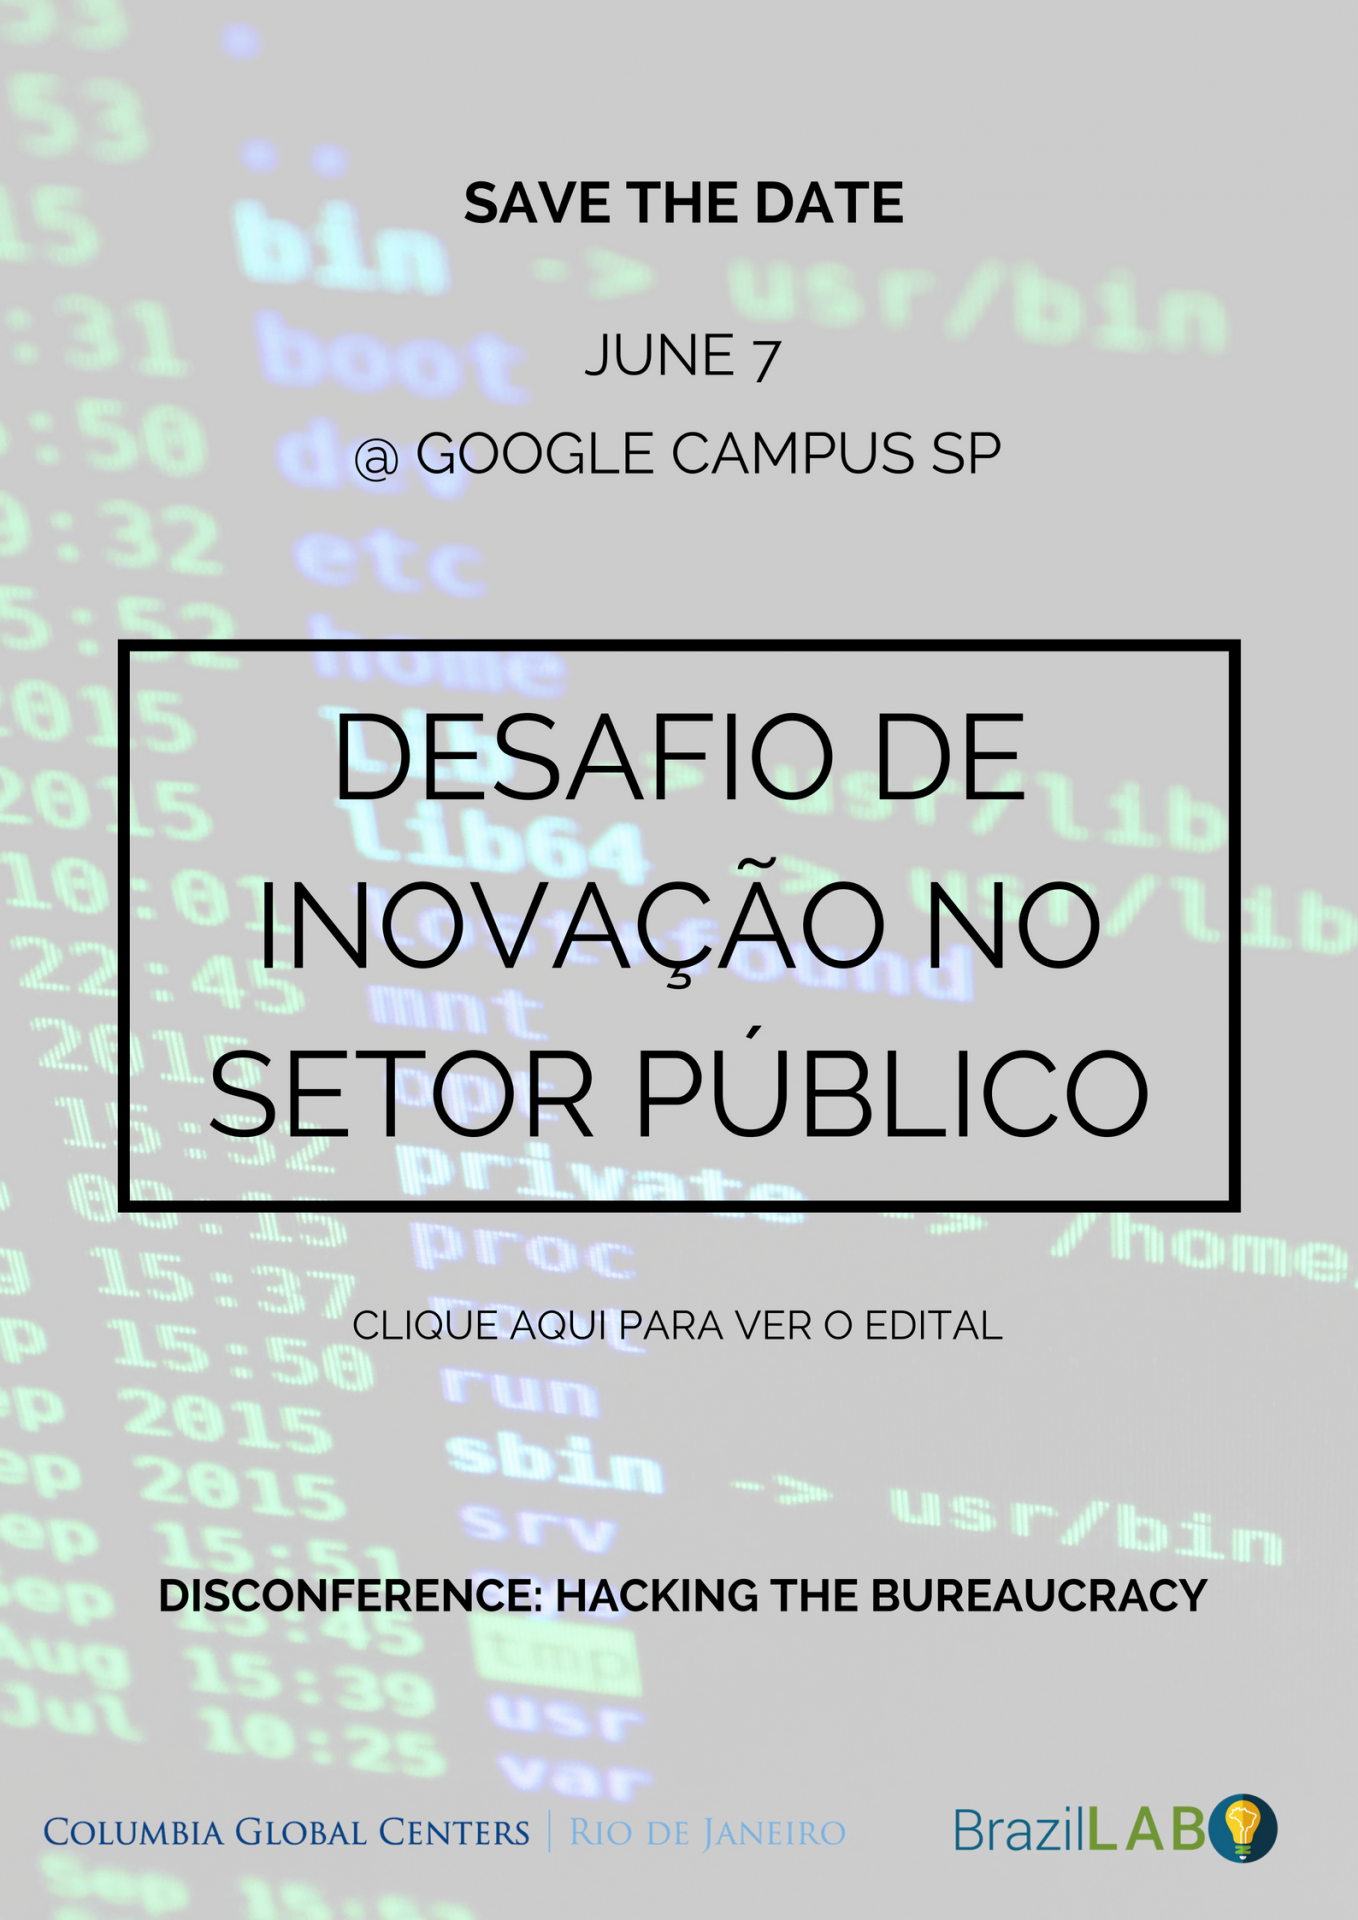 Save the date - Hacking the Bureaucracy